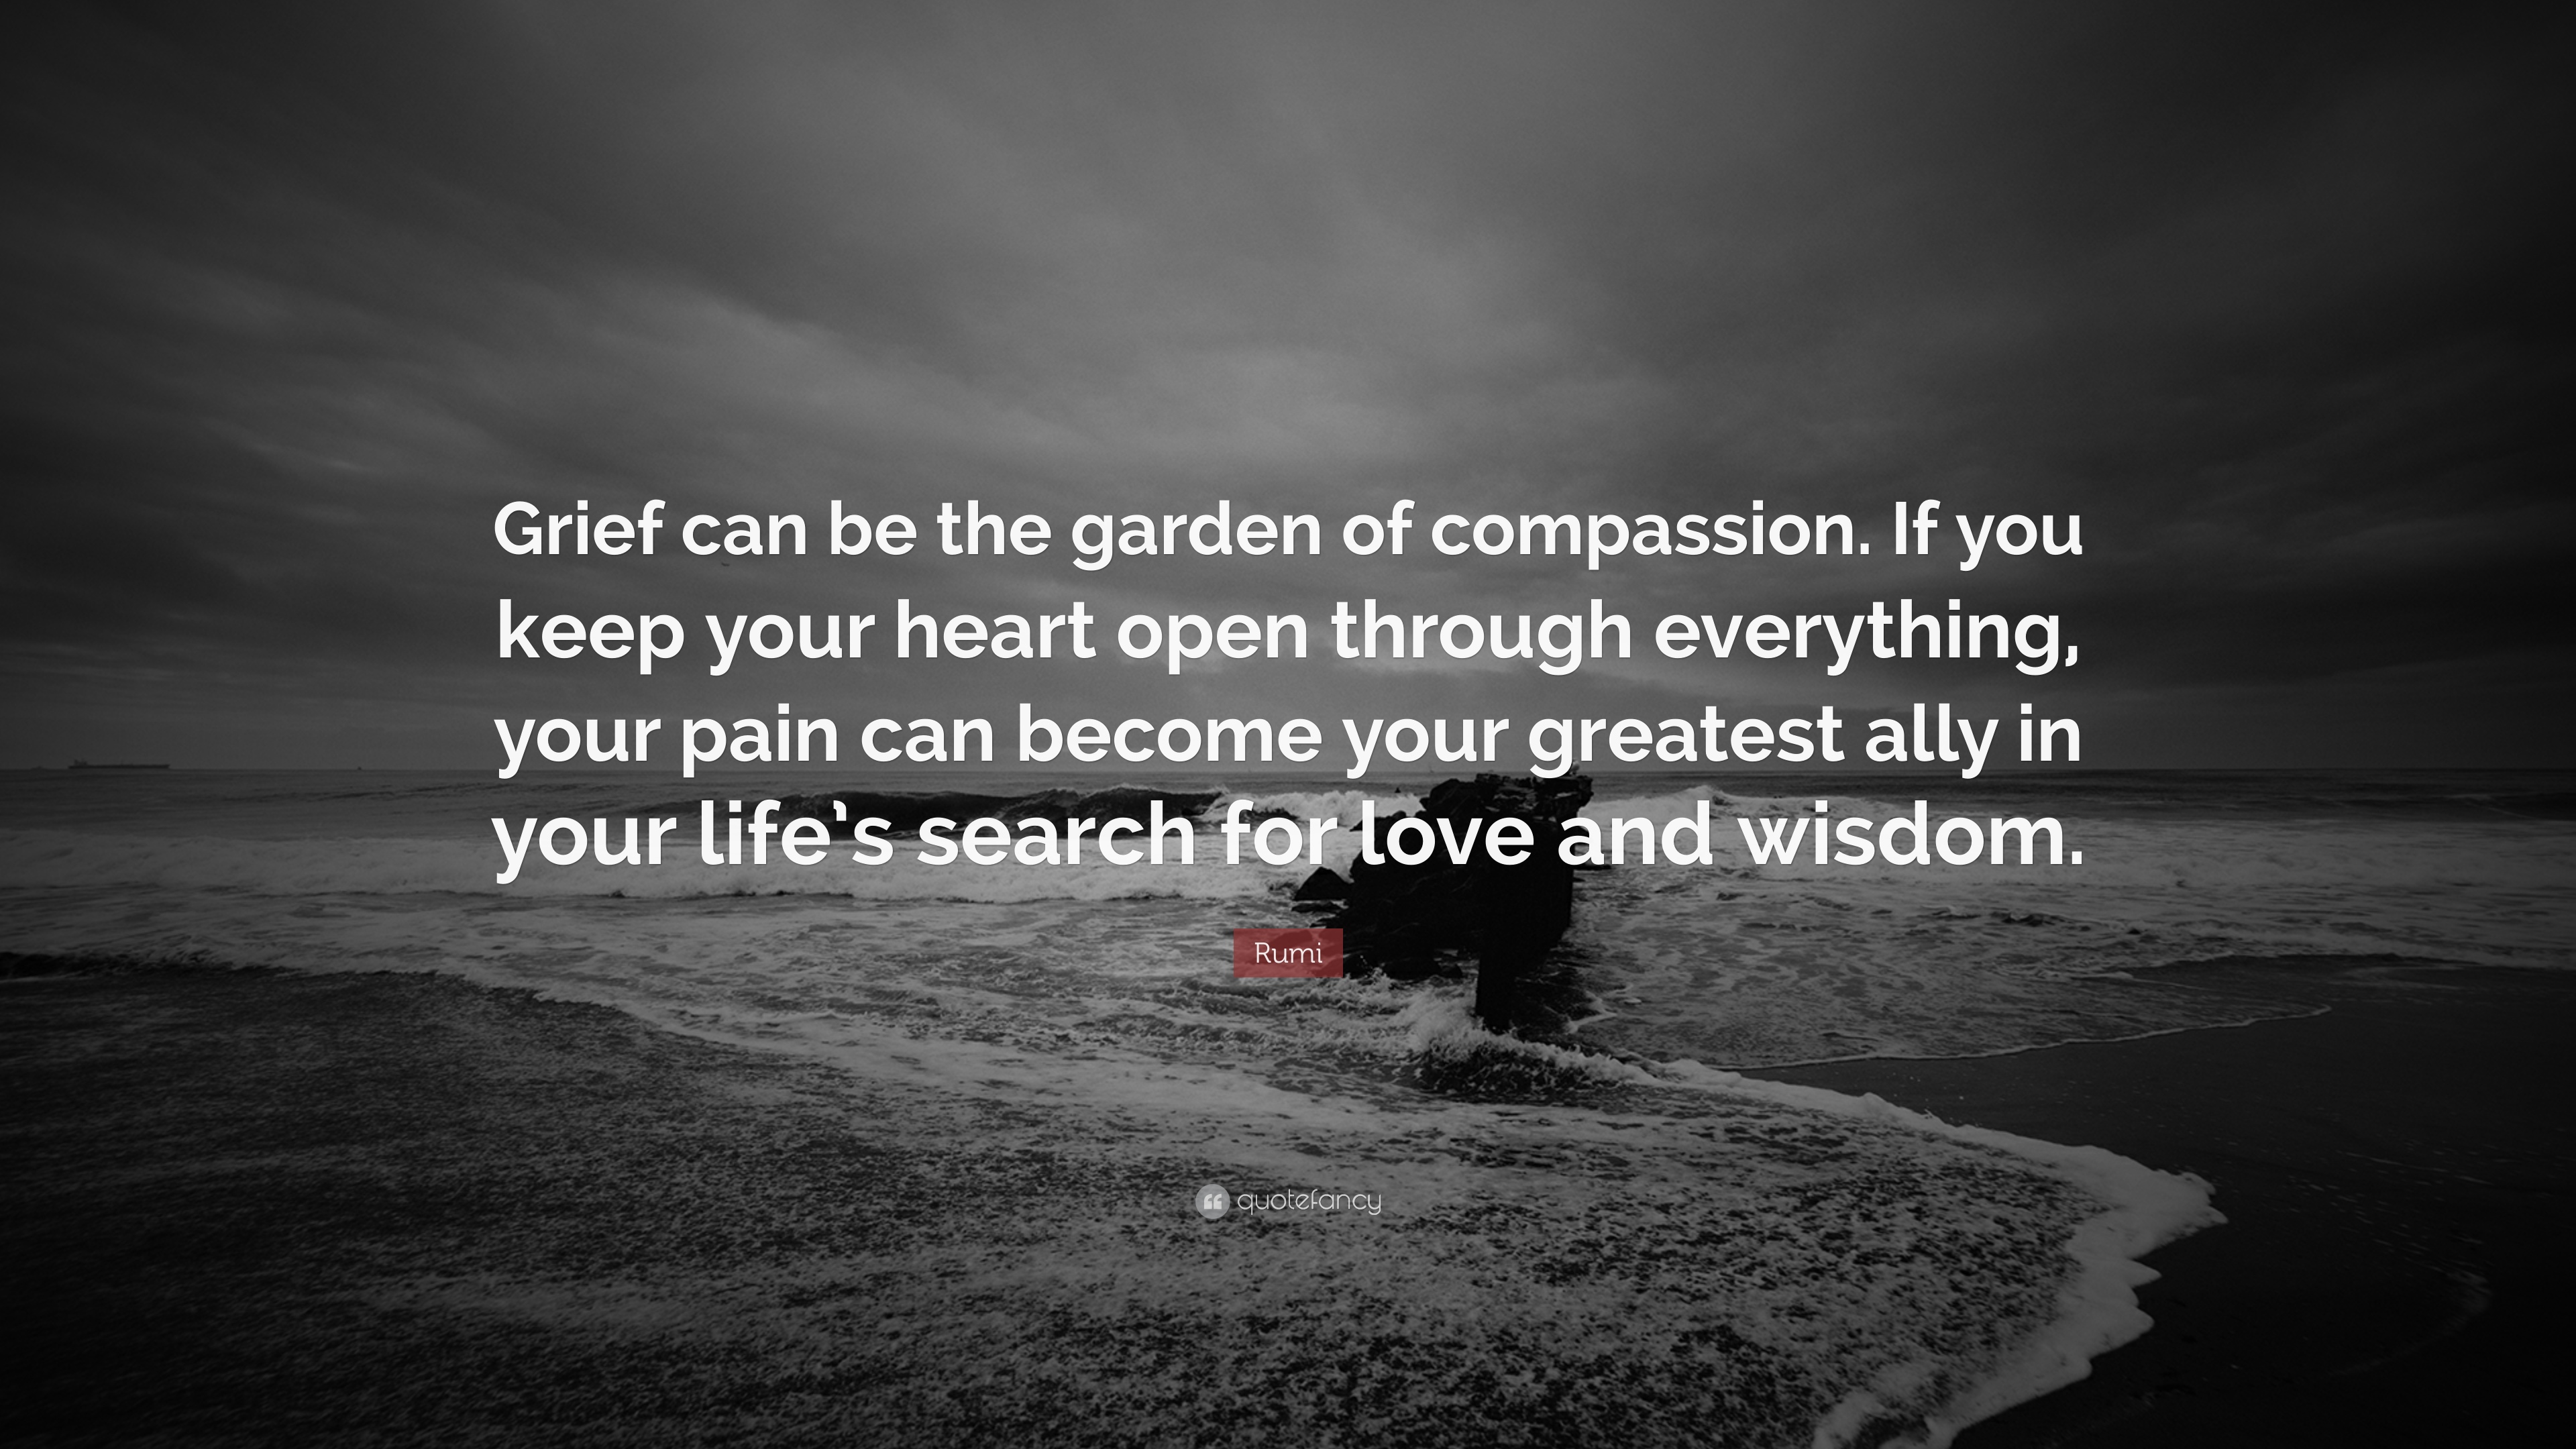 Rumi Quote: “Grief can be the garden of compassion. If you